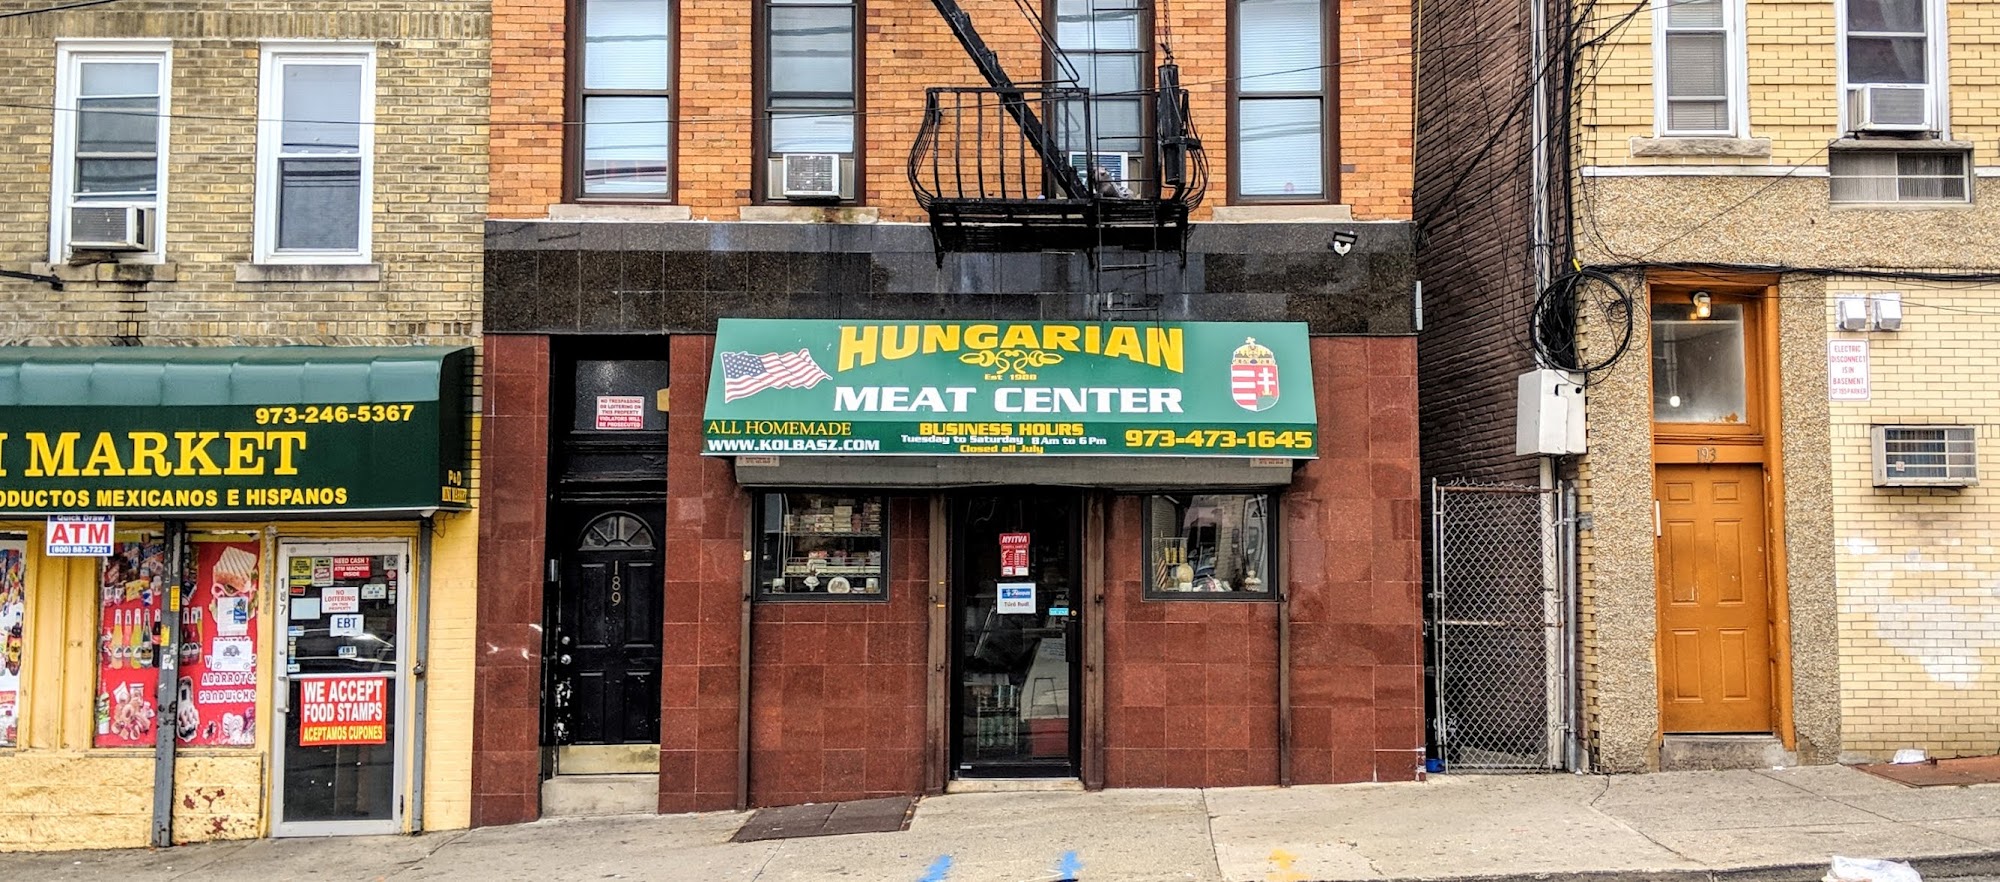 Hungarian Meat Center